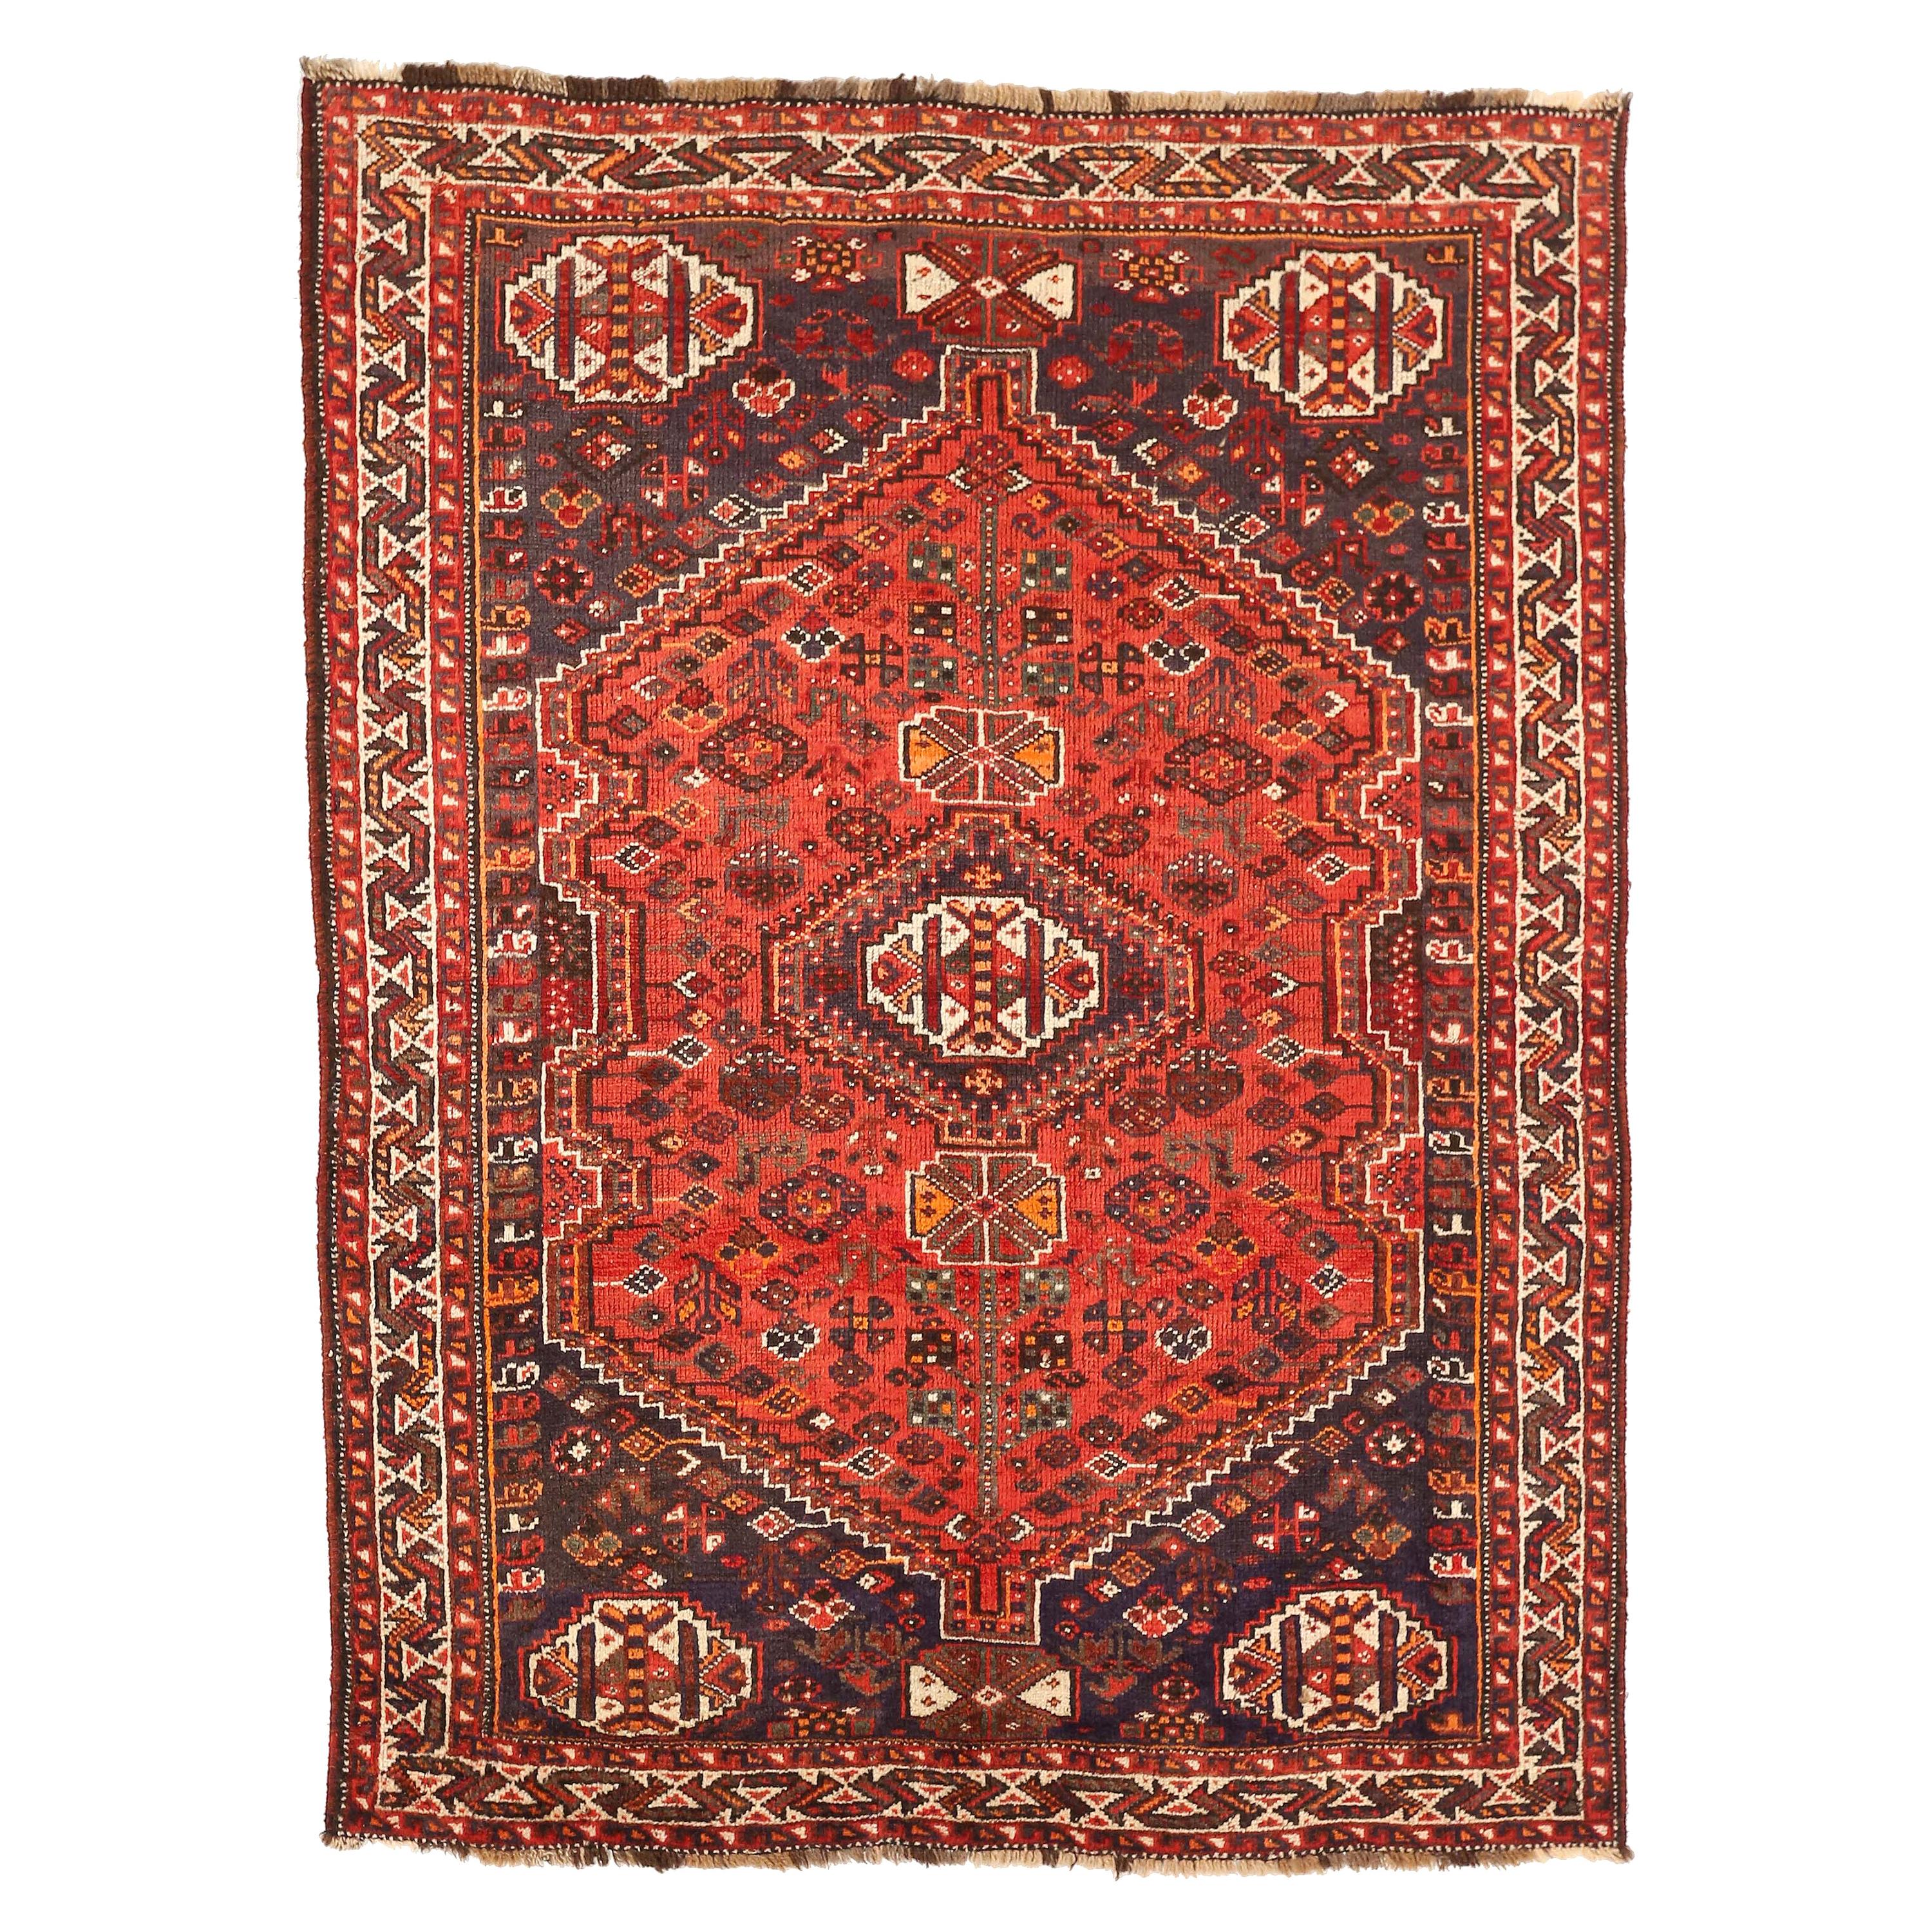 Antique Persian Shiraz Rug with Red and White Geometric Details on Black Field